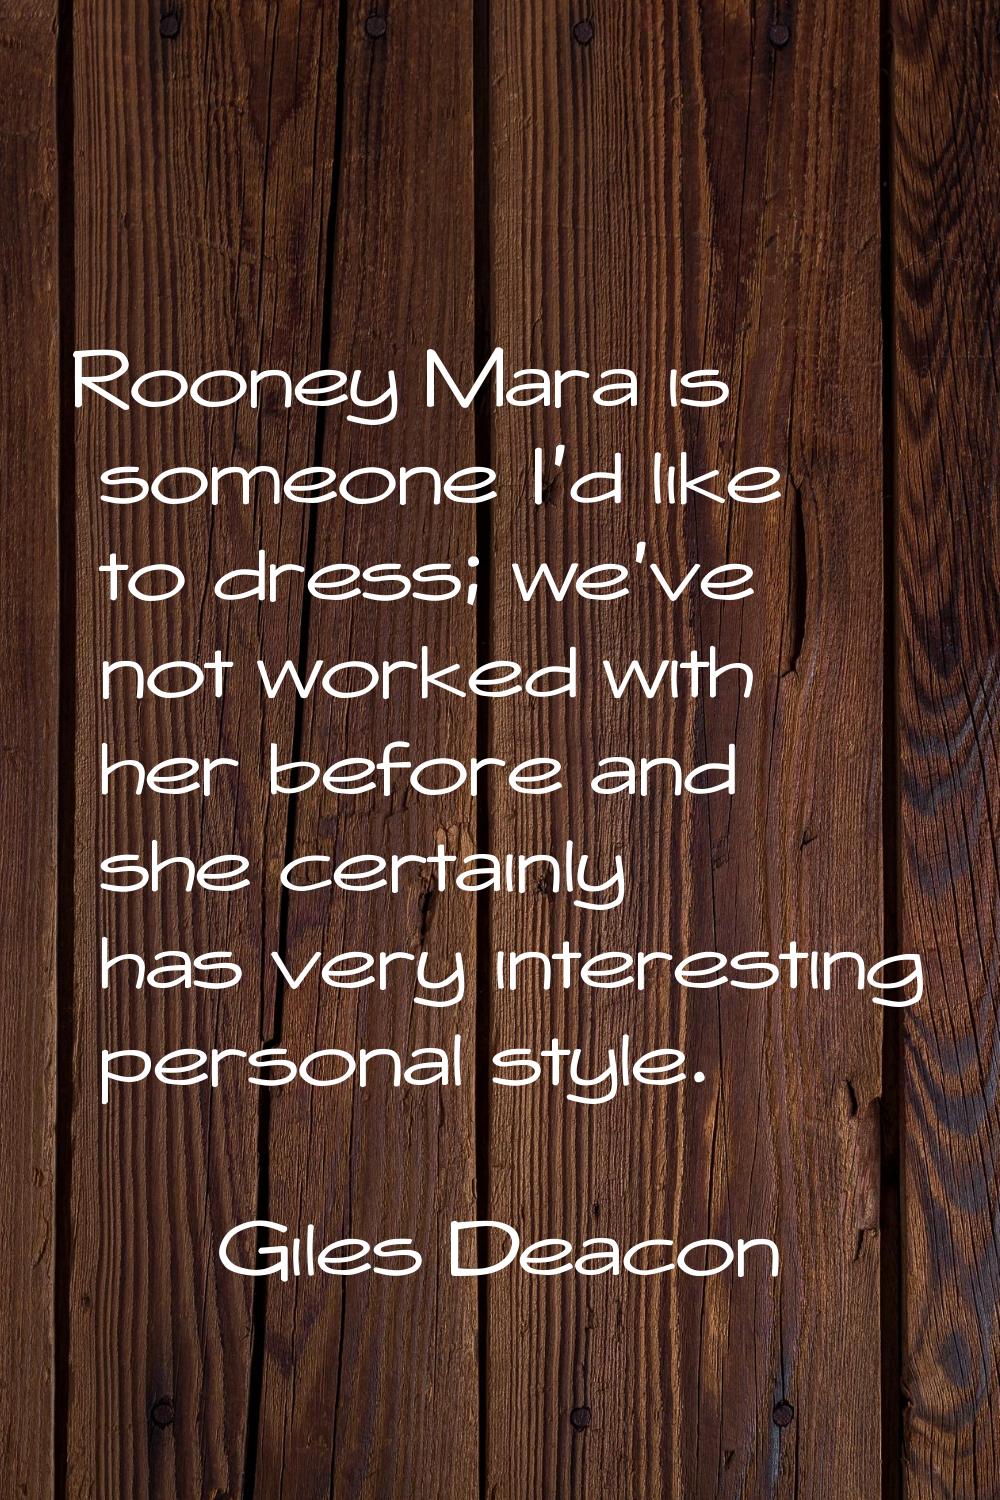 Rooney Mara is someone I'd like to dress; we've not worked with her before and she certainly has ve